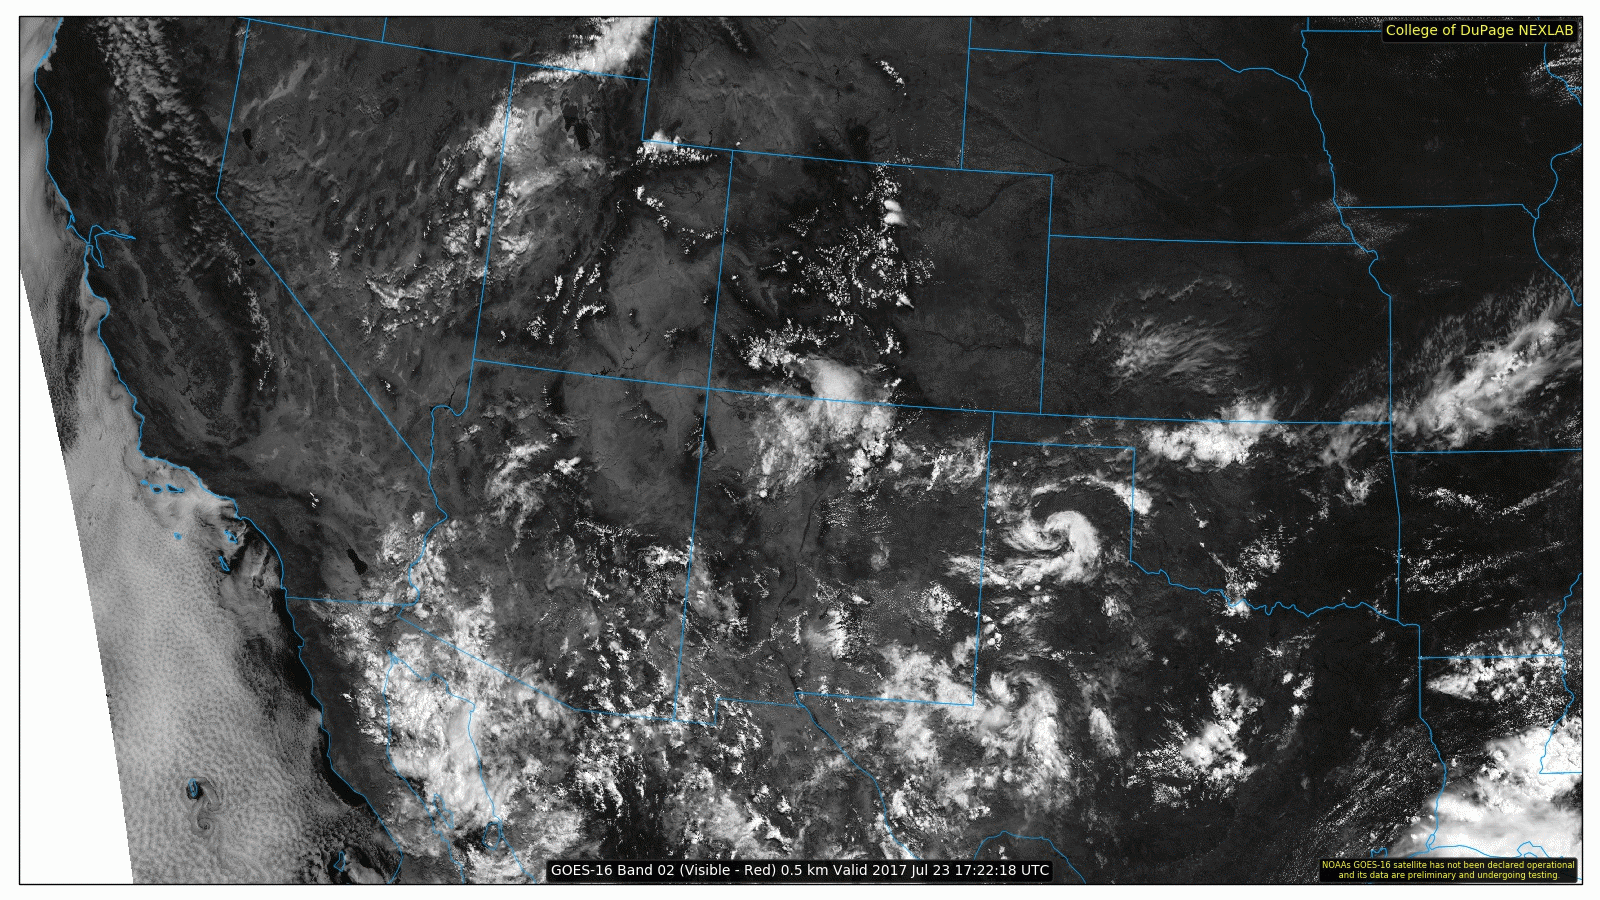 GOES-16 visible satellite|Source: College of DuPage